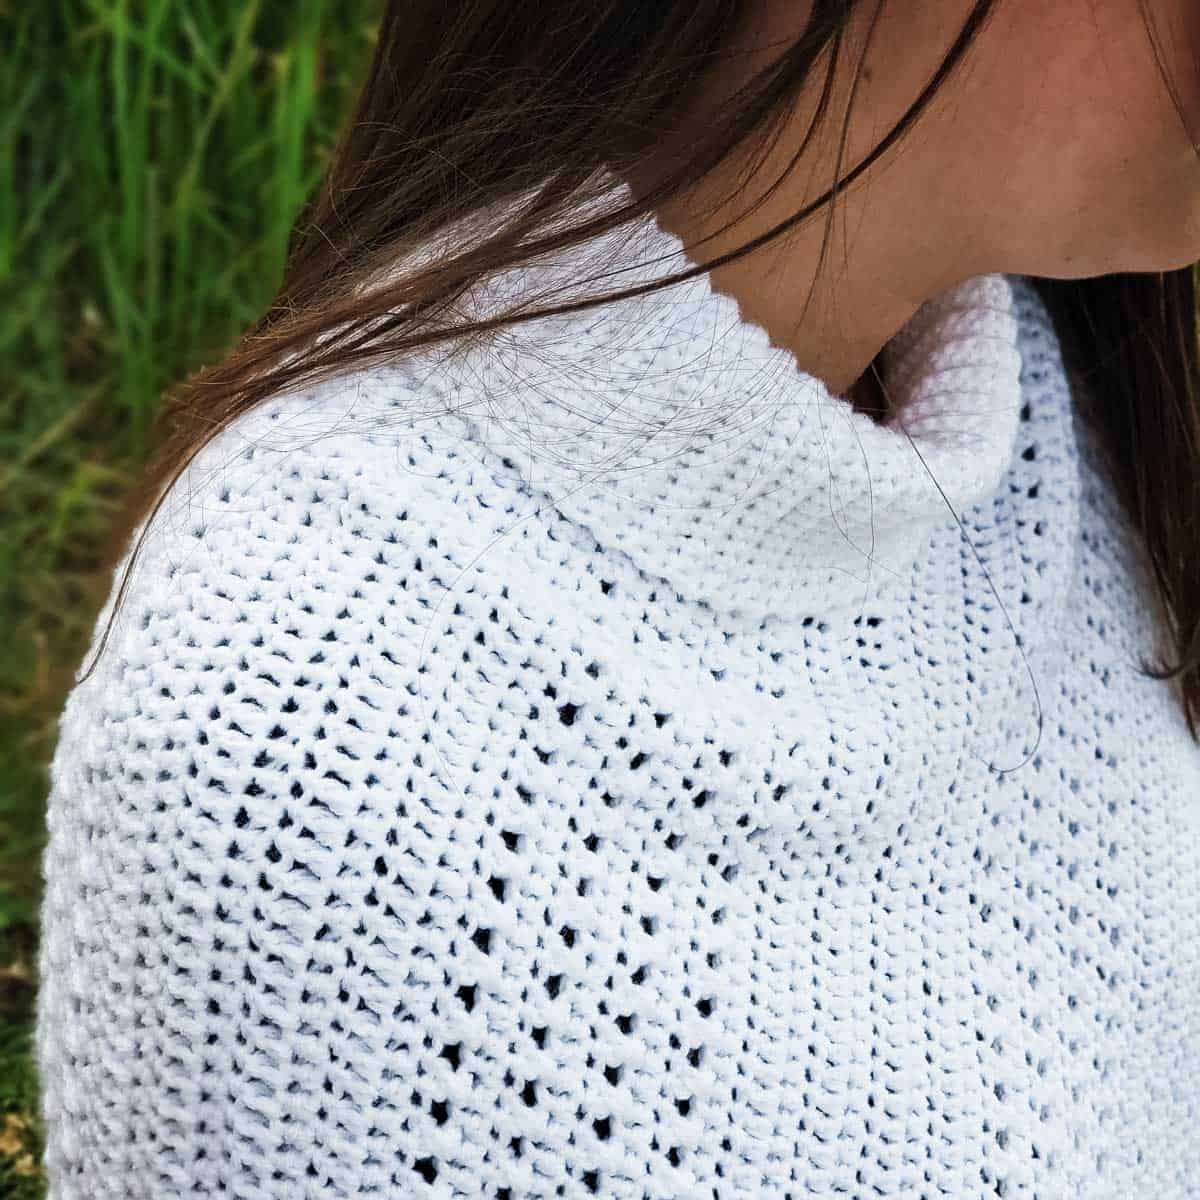 A close up of a woman wearing a crochet poncho made from a rectangle.